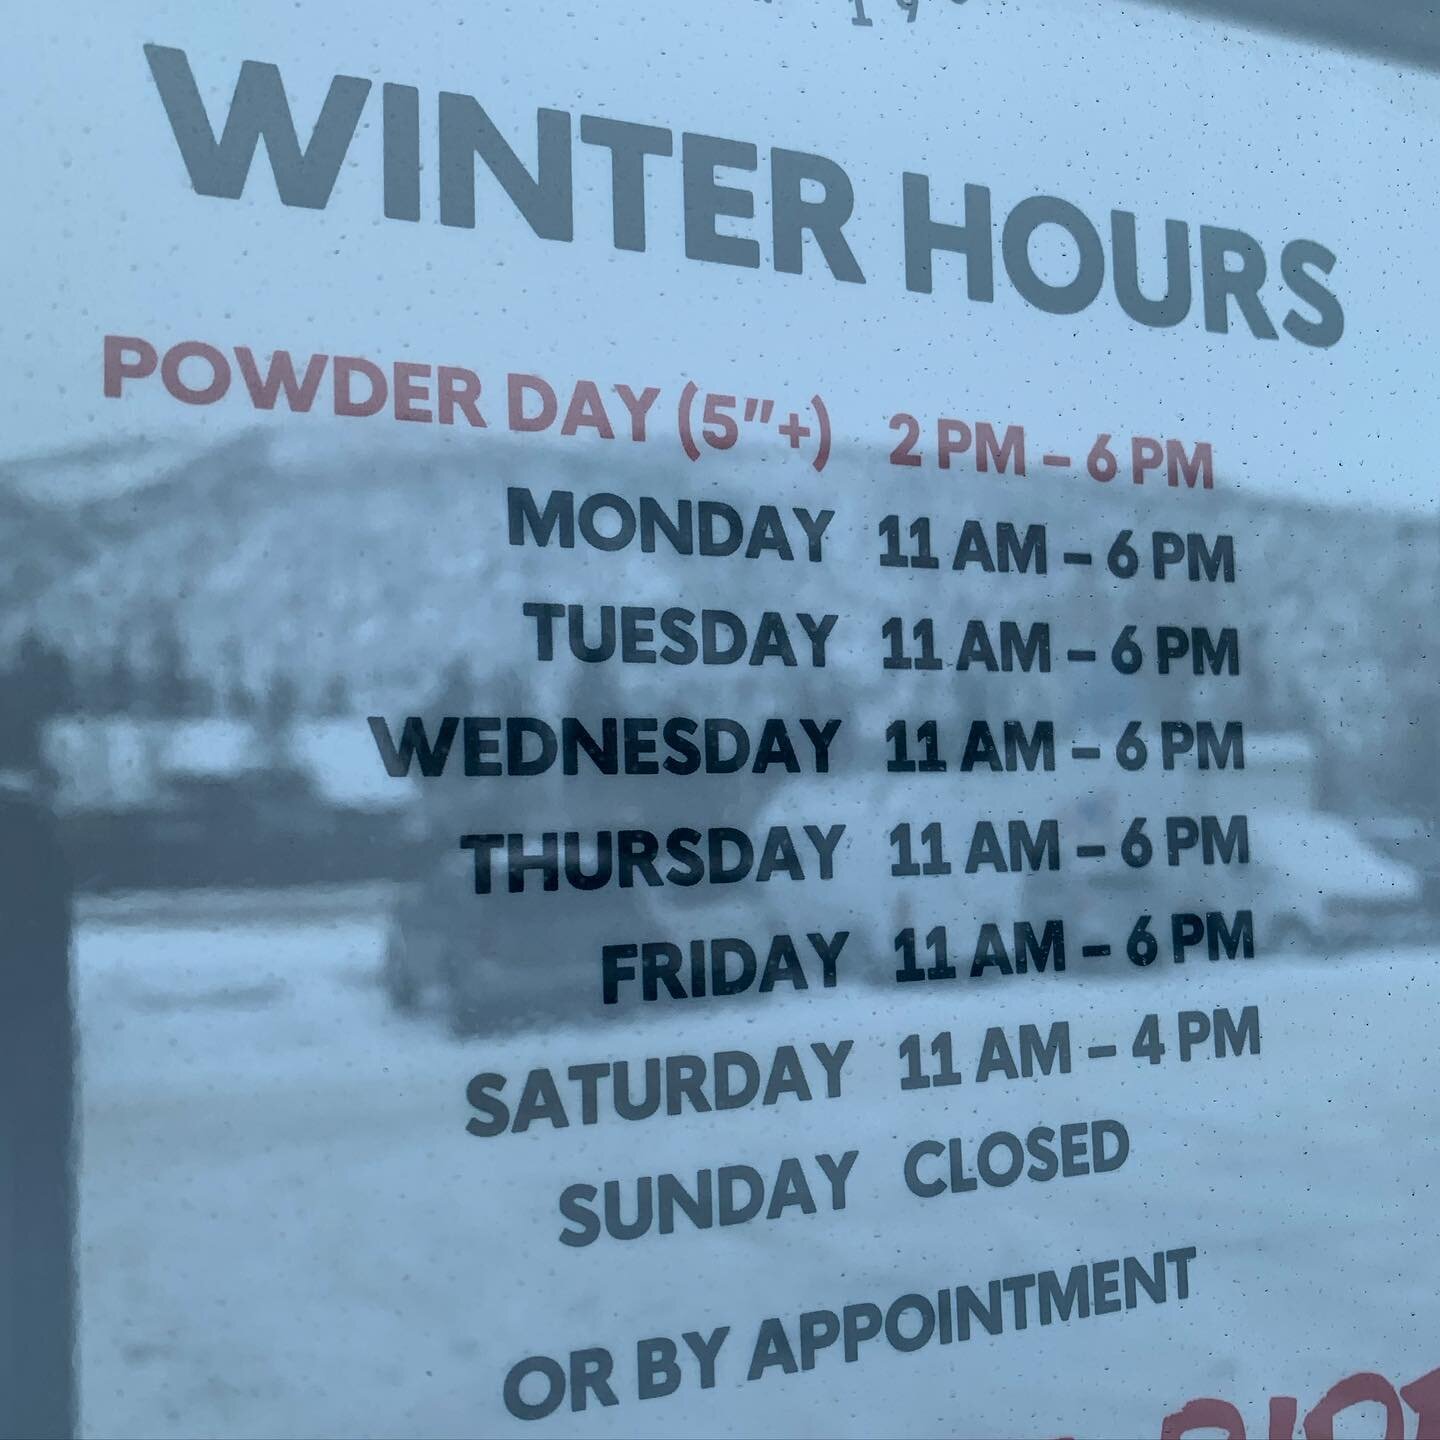 We&rsquo;re open today until 6pm, but please note we will often OPEN LATE (2pm) on powder days! We&rsquo;ll do our best to keep you posted when that happens.

Our non-powder-day winter hours are:
Monday-Friday: 11am-6pm
Saturday: 11am-4pm
Closed Sund